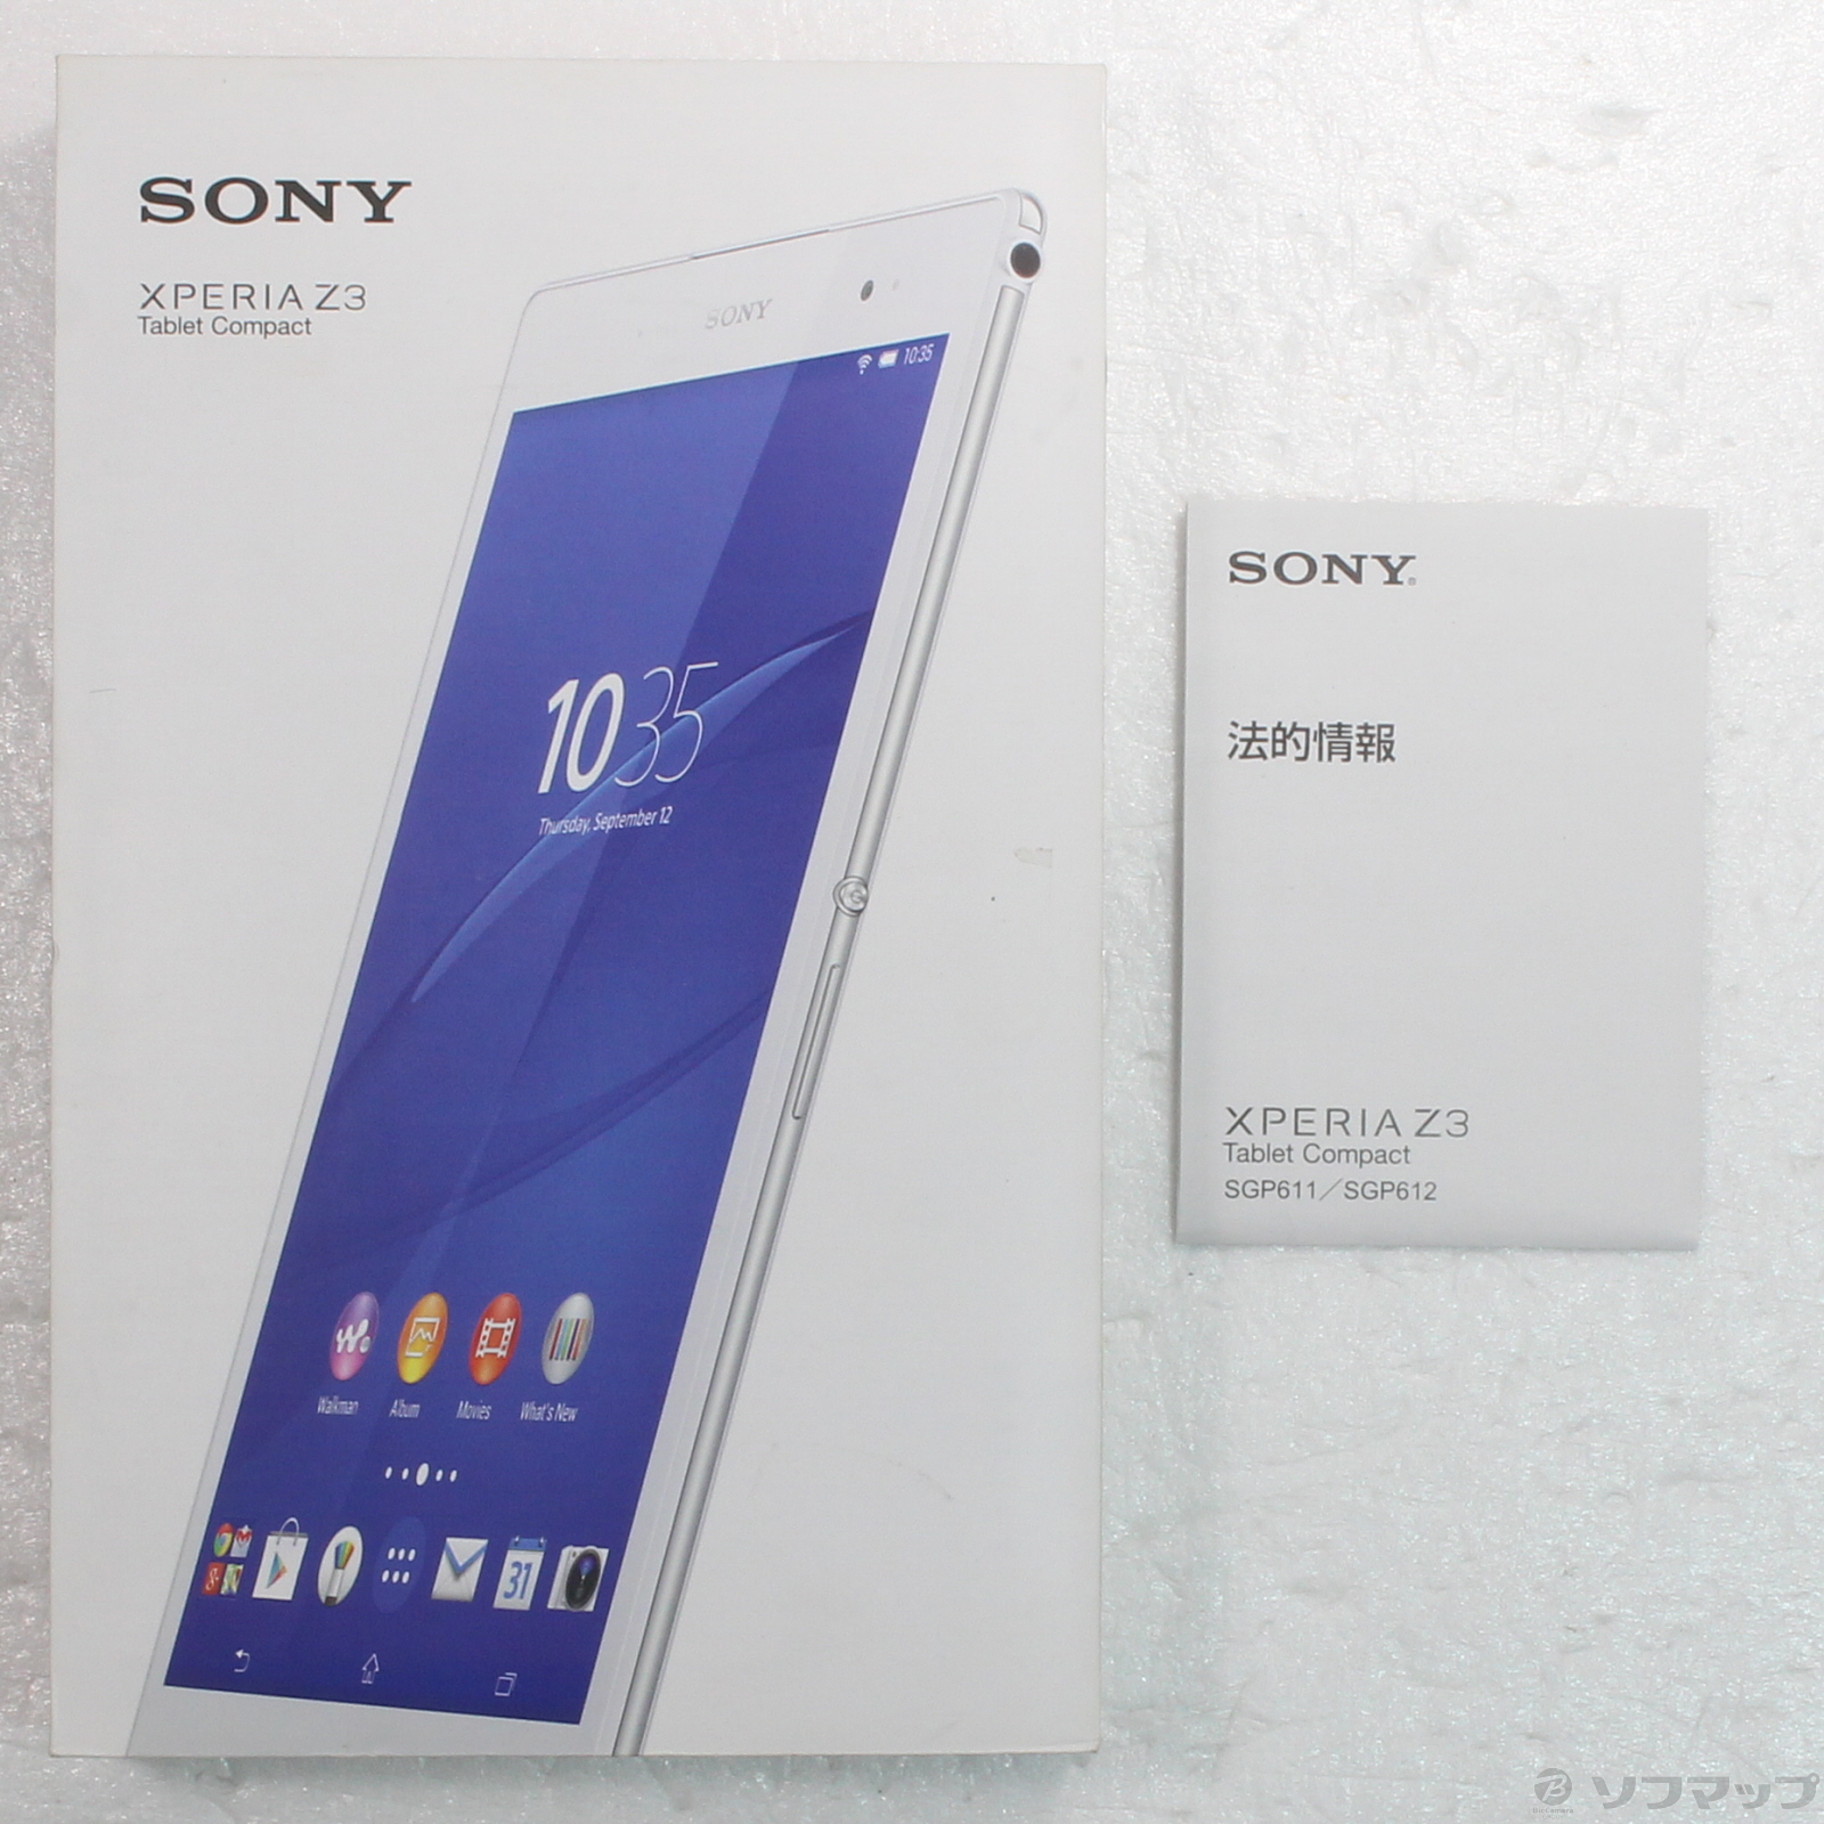 Xperia Z3 Tablet Compact ソニーストア版 16GB ホワイト SGP611JP／W Wi-Fi